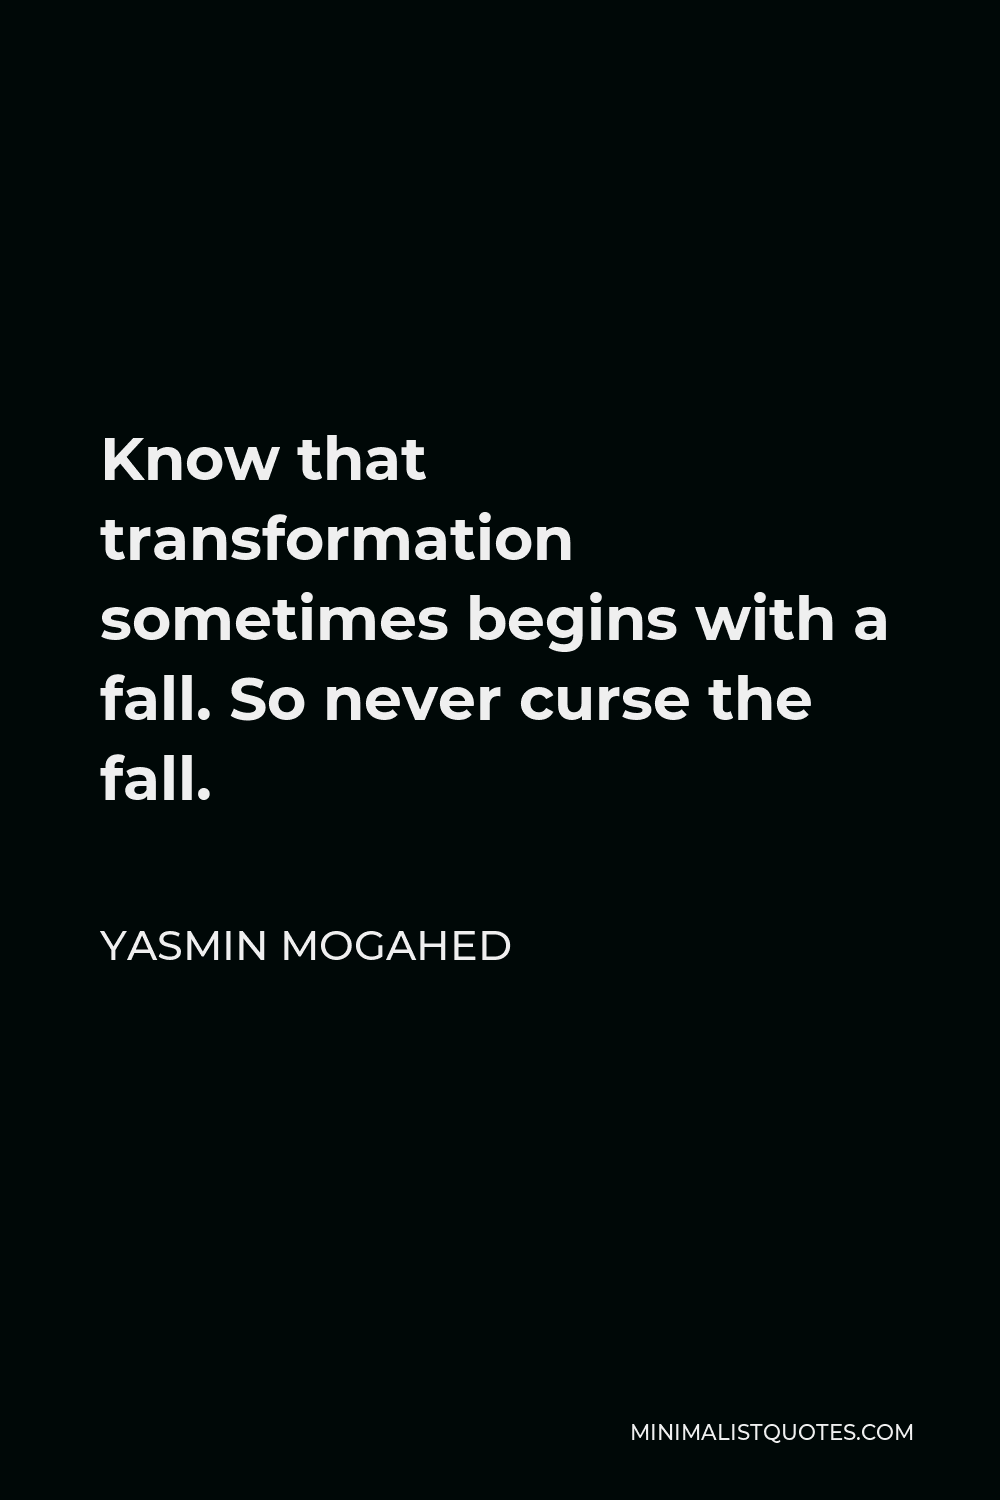 Yasmin Mogahed Quote - Know that transformation sometimes begins with a fall. So never curse the fall.